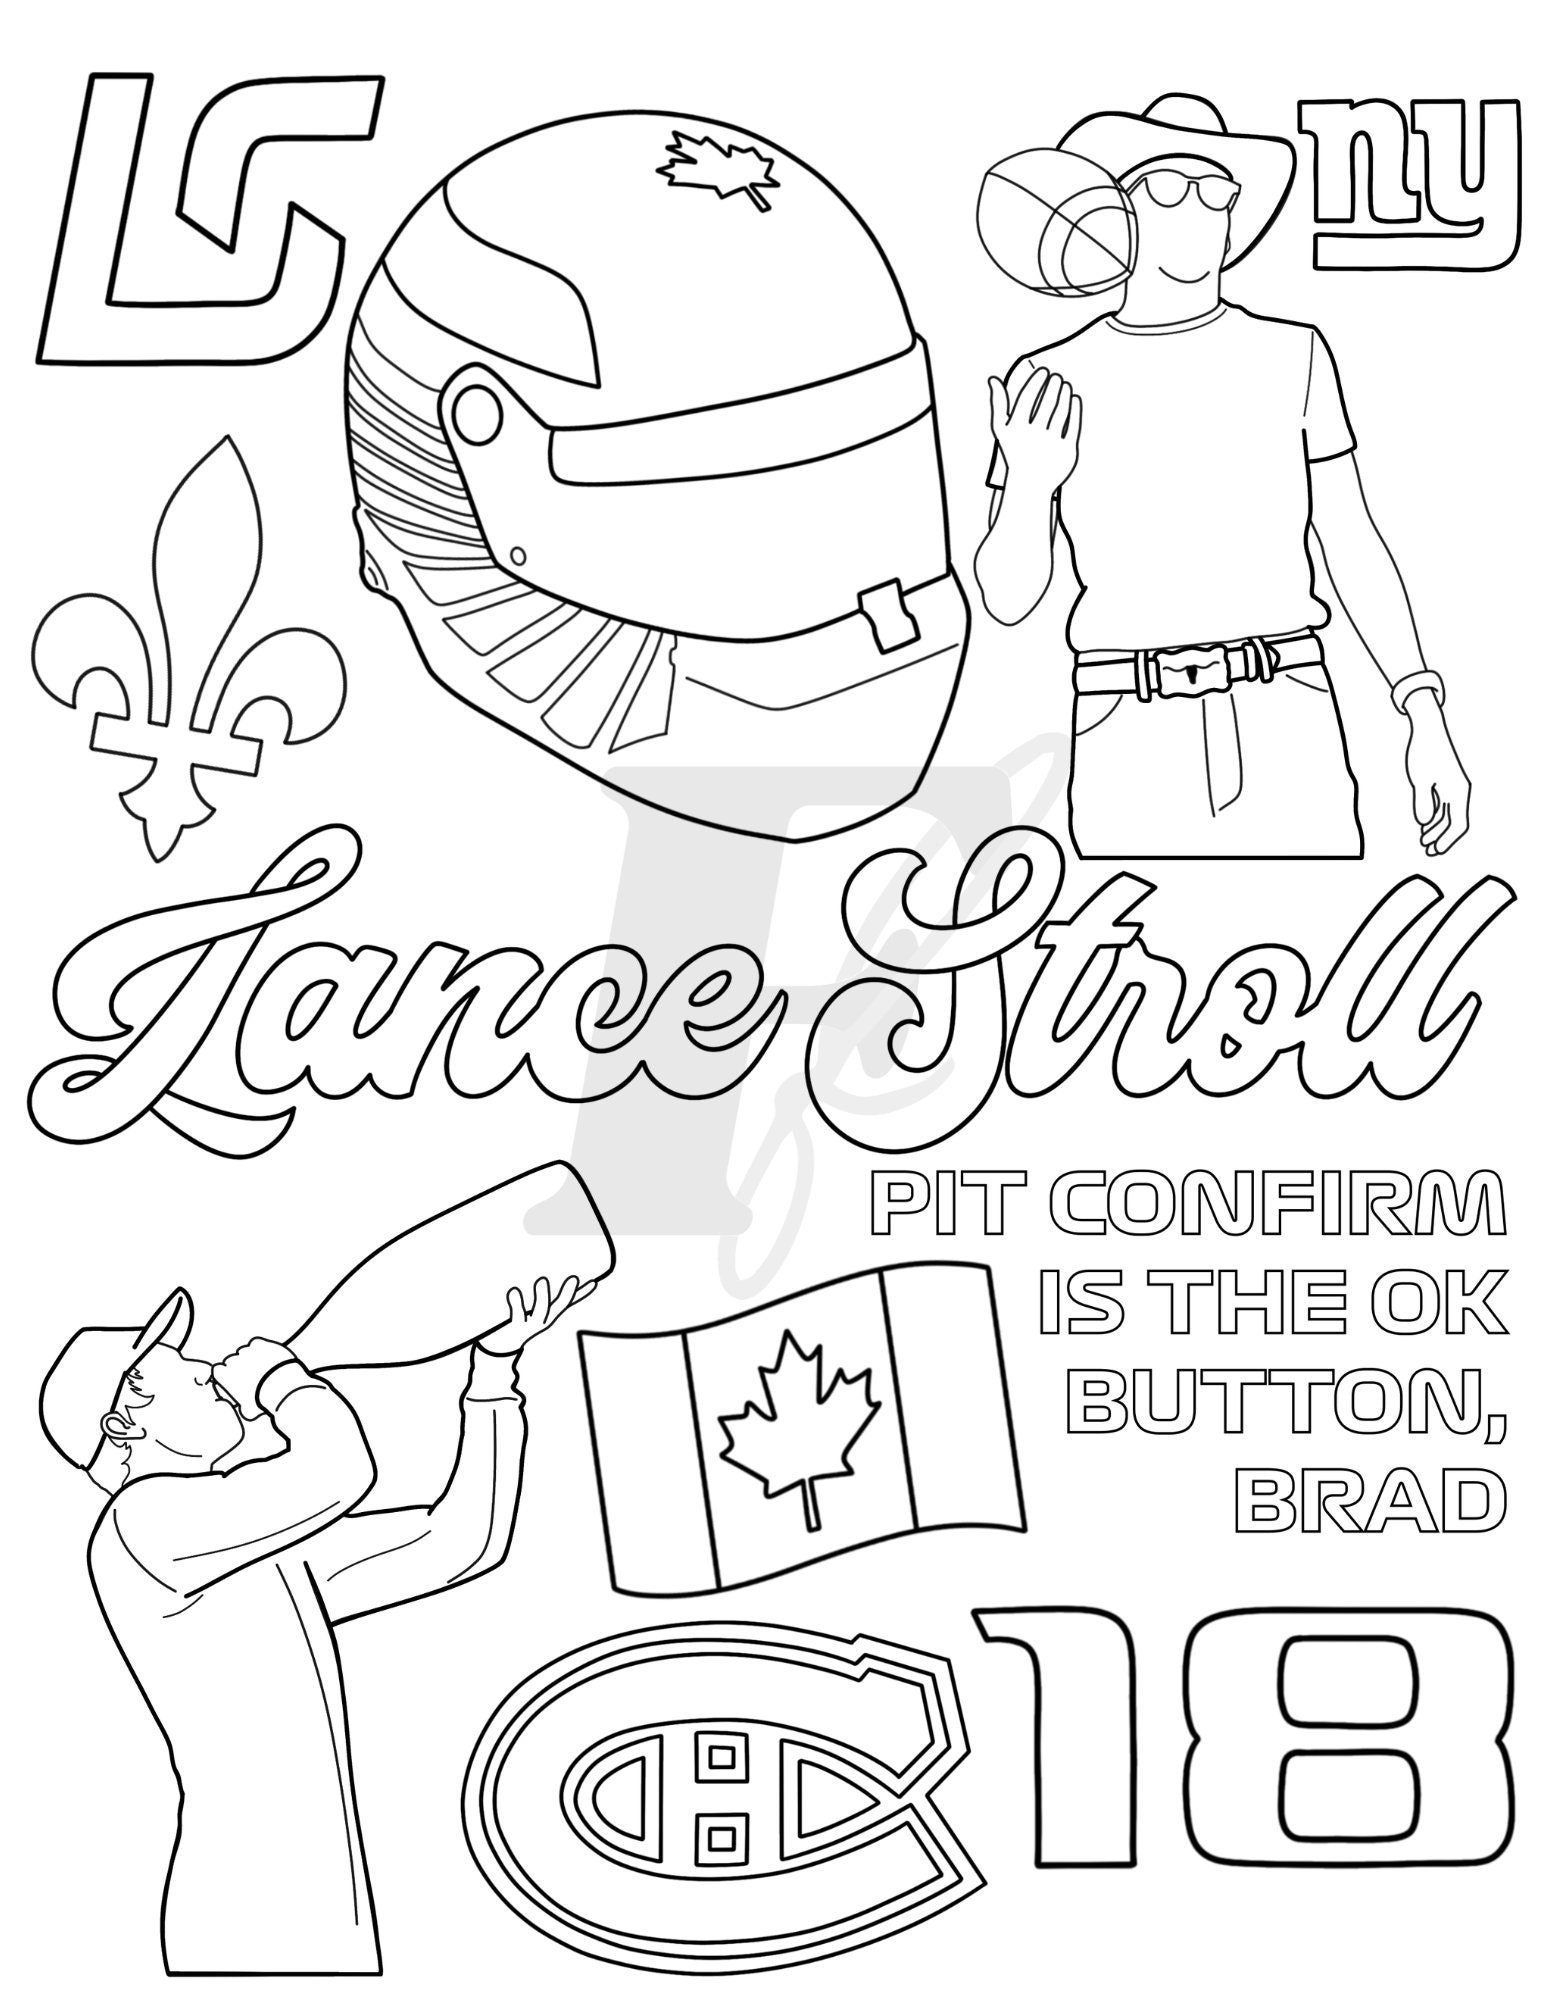 Lance stroll formula colouring sheet f driver coloring sheet collection instant download